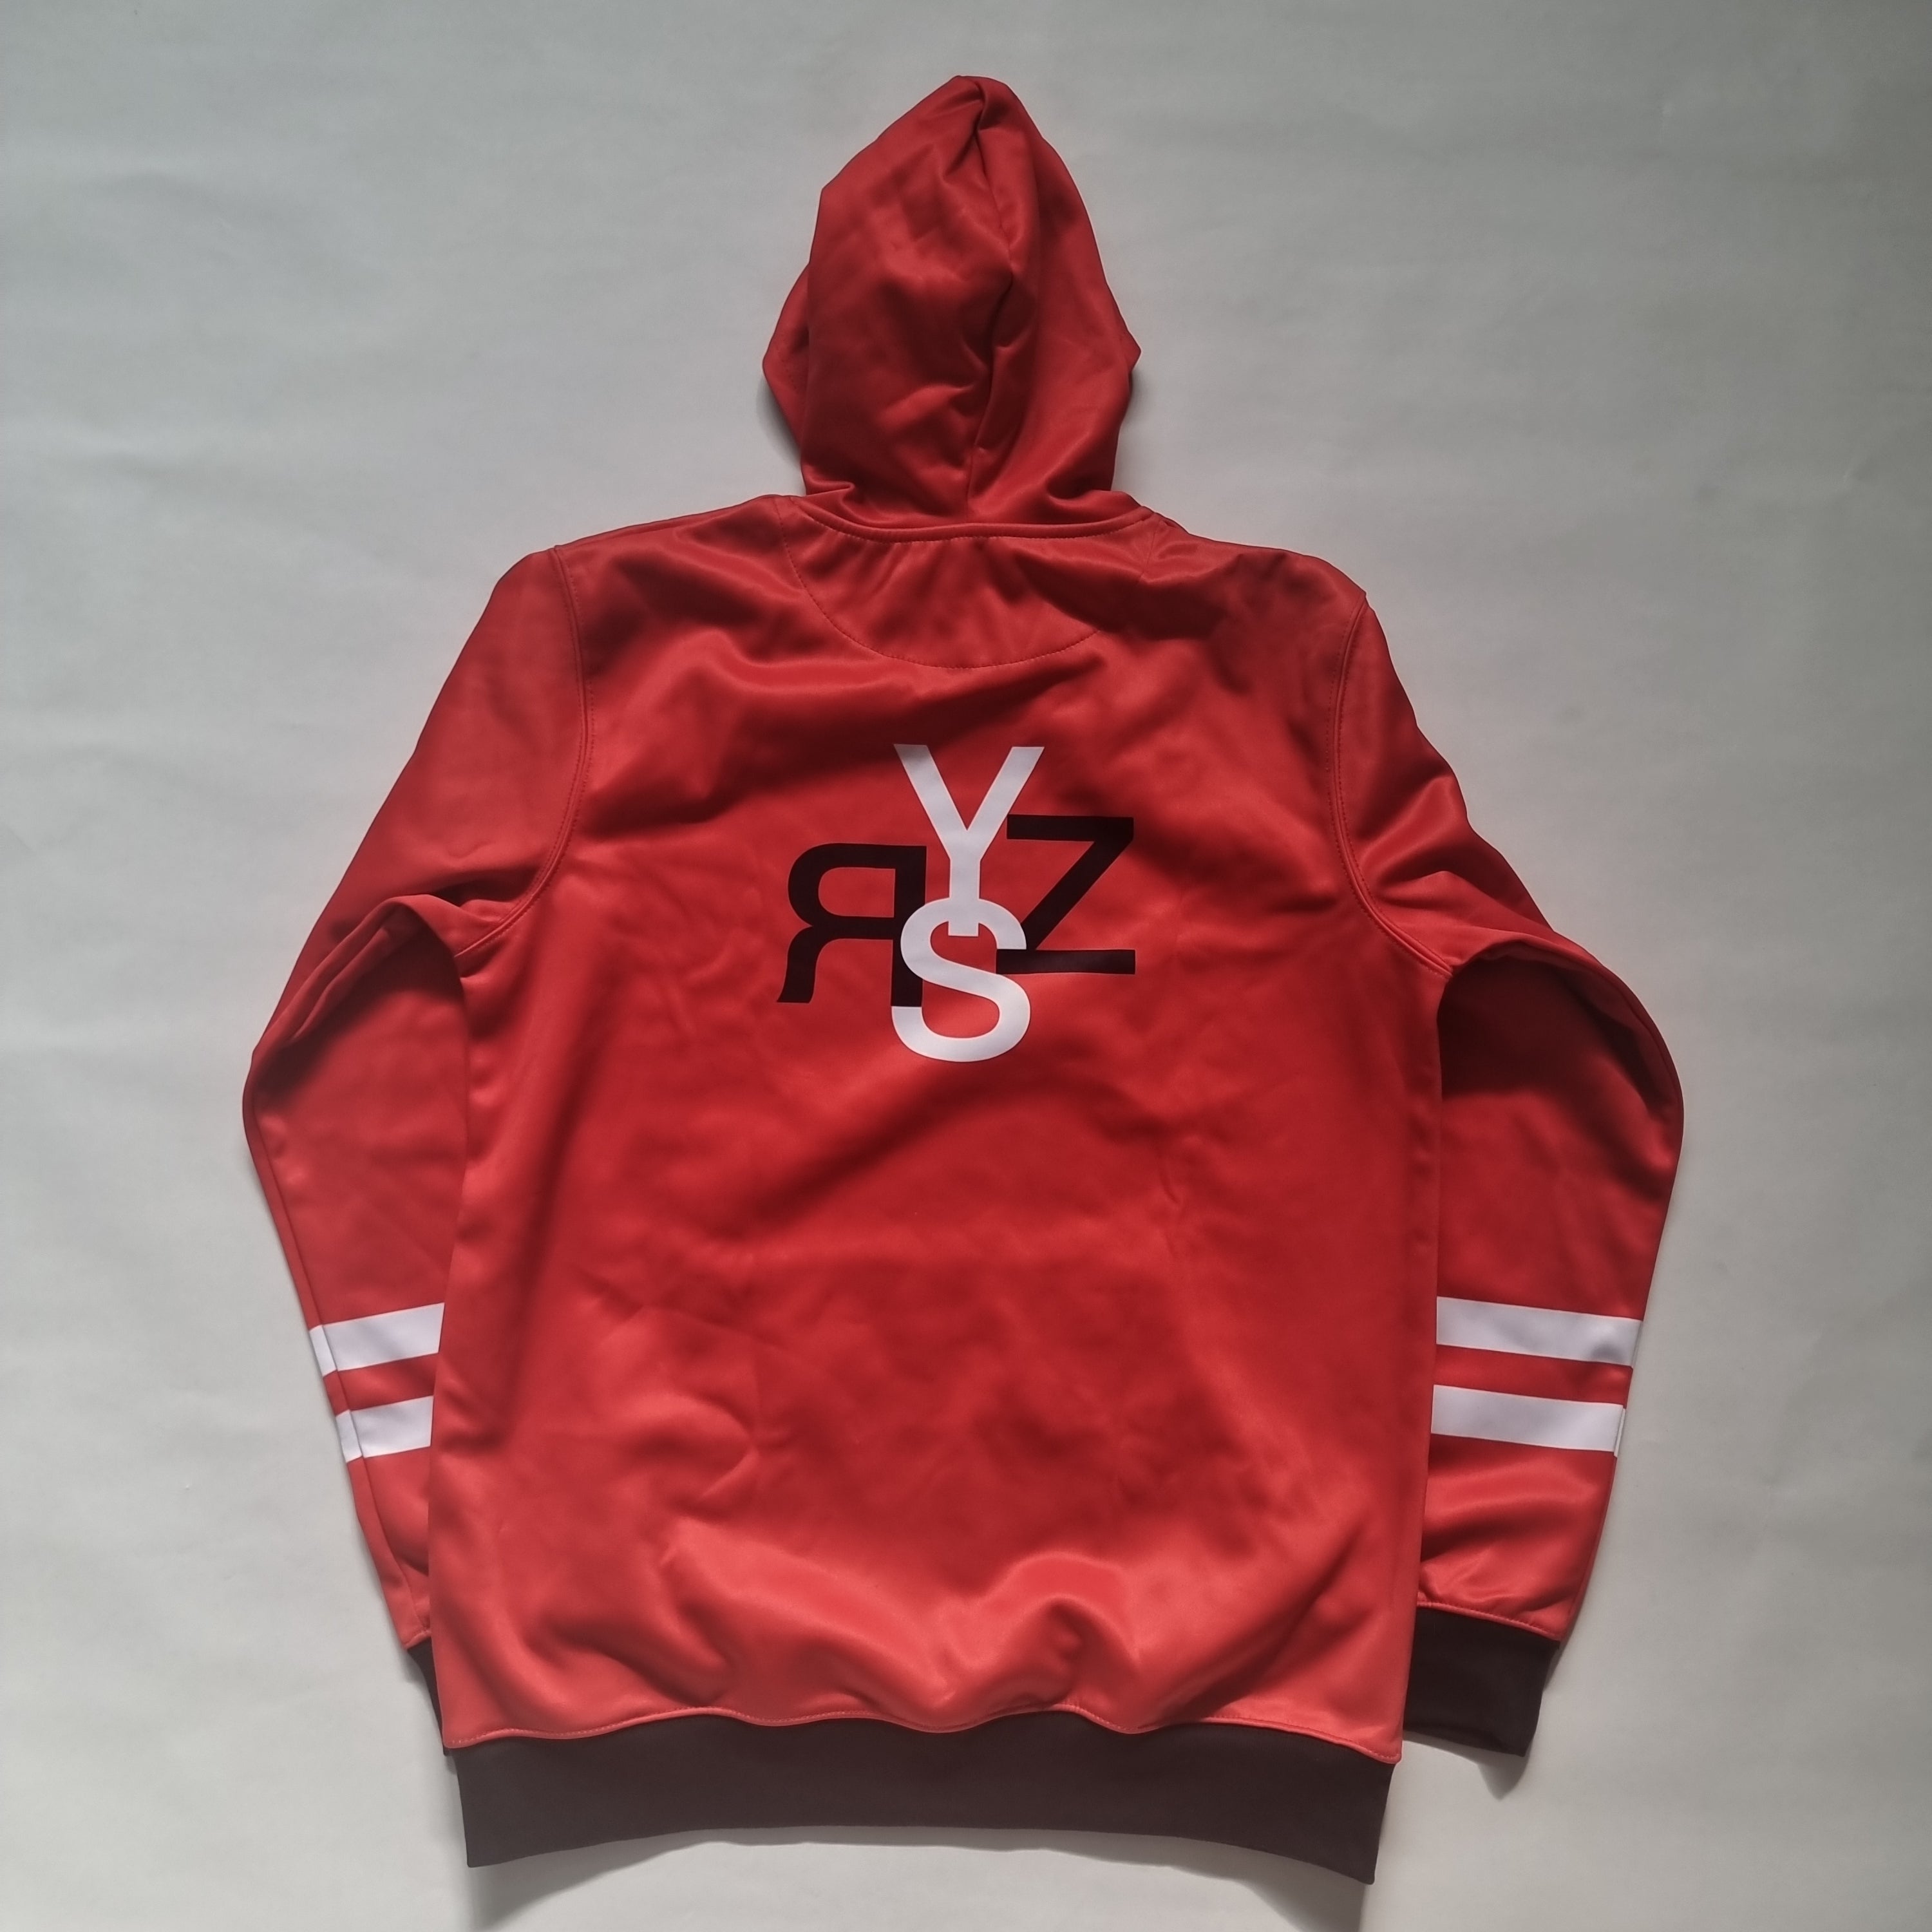 All over red orange hoodie